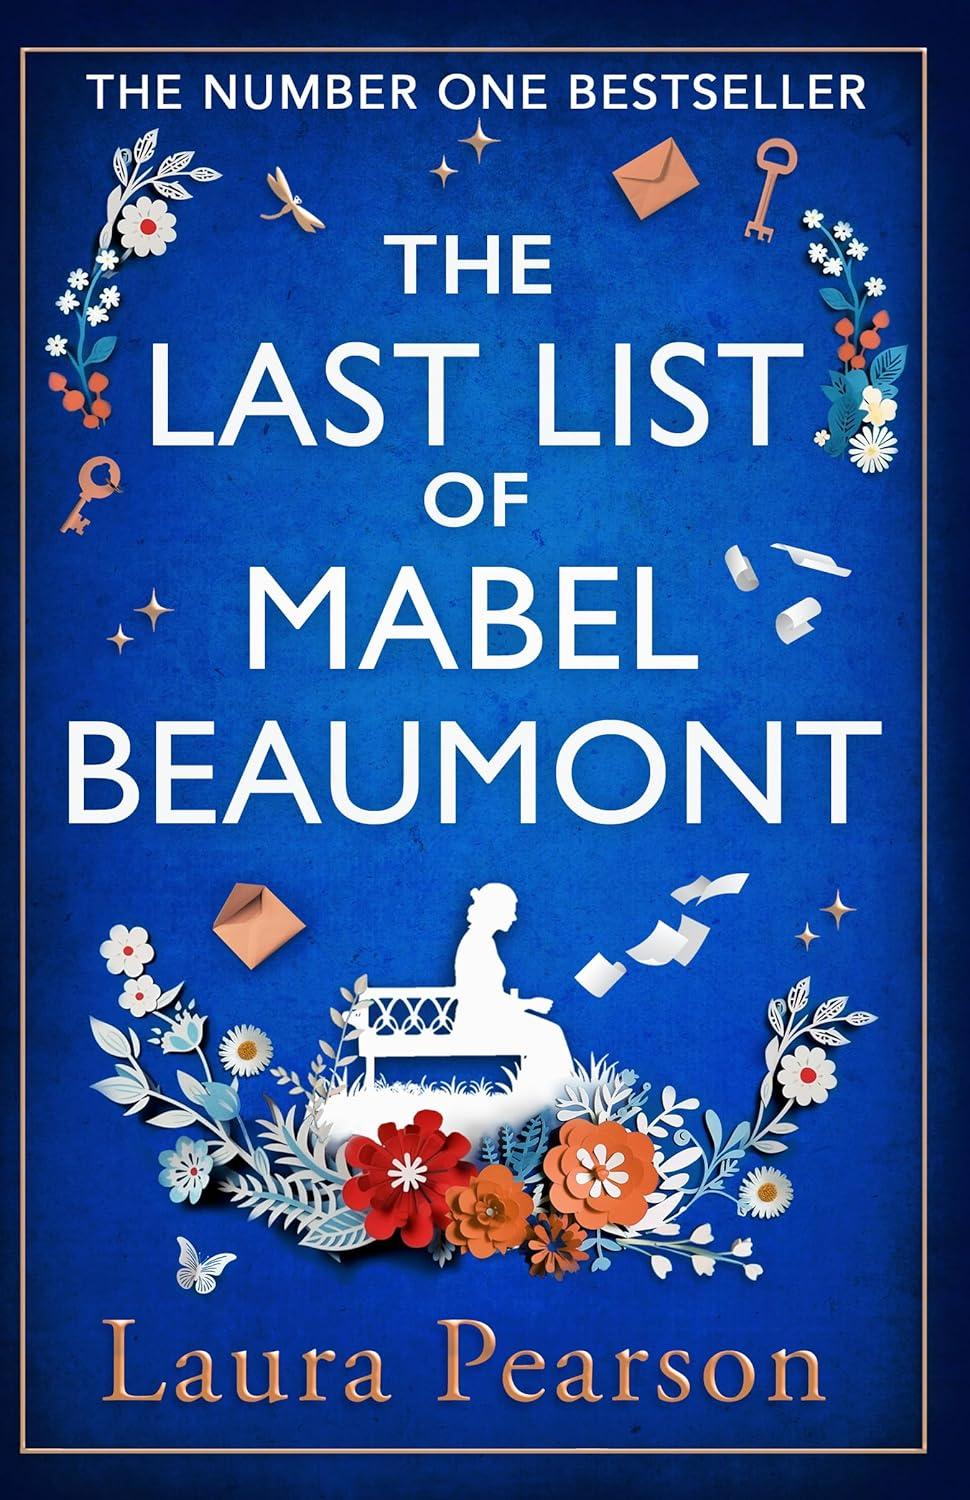 "The Last List of Mabel Beaumont," by Laura Pearson.